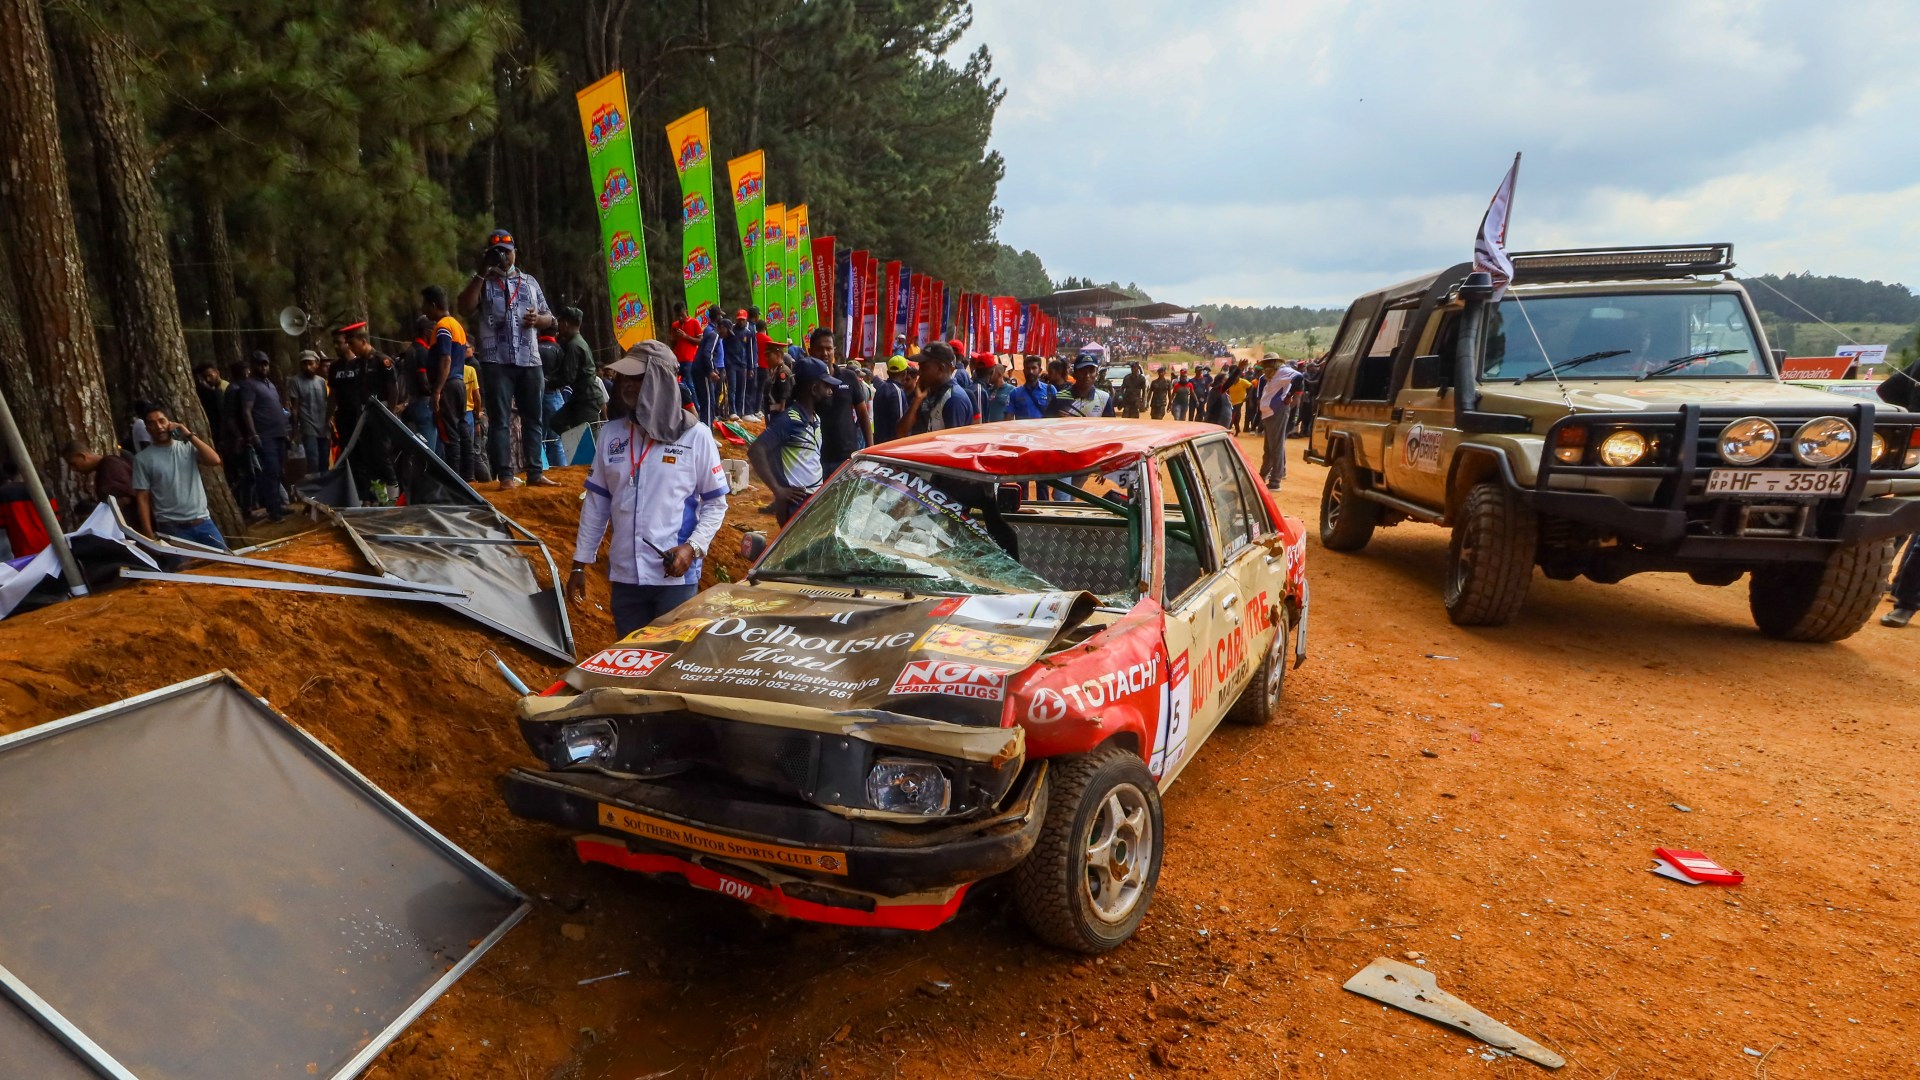 At least 7 dead & 21 injured as rally car ploughs into crowd in massive crash at Fox Hill Super Cross event in Sri Lanka